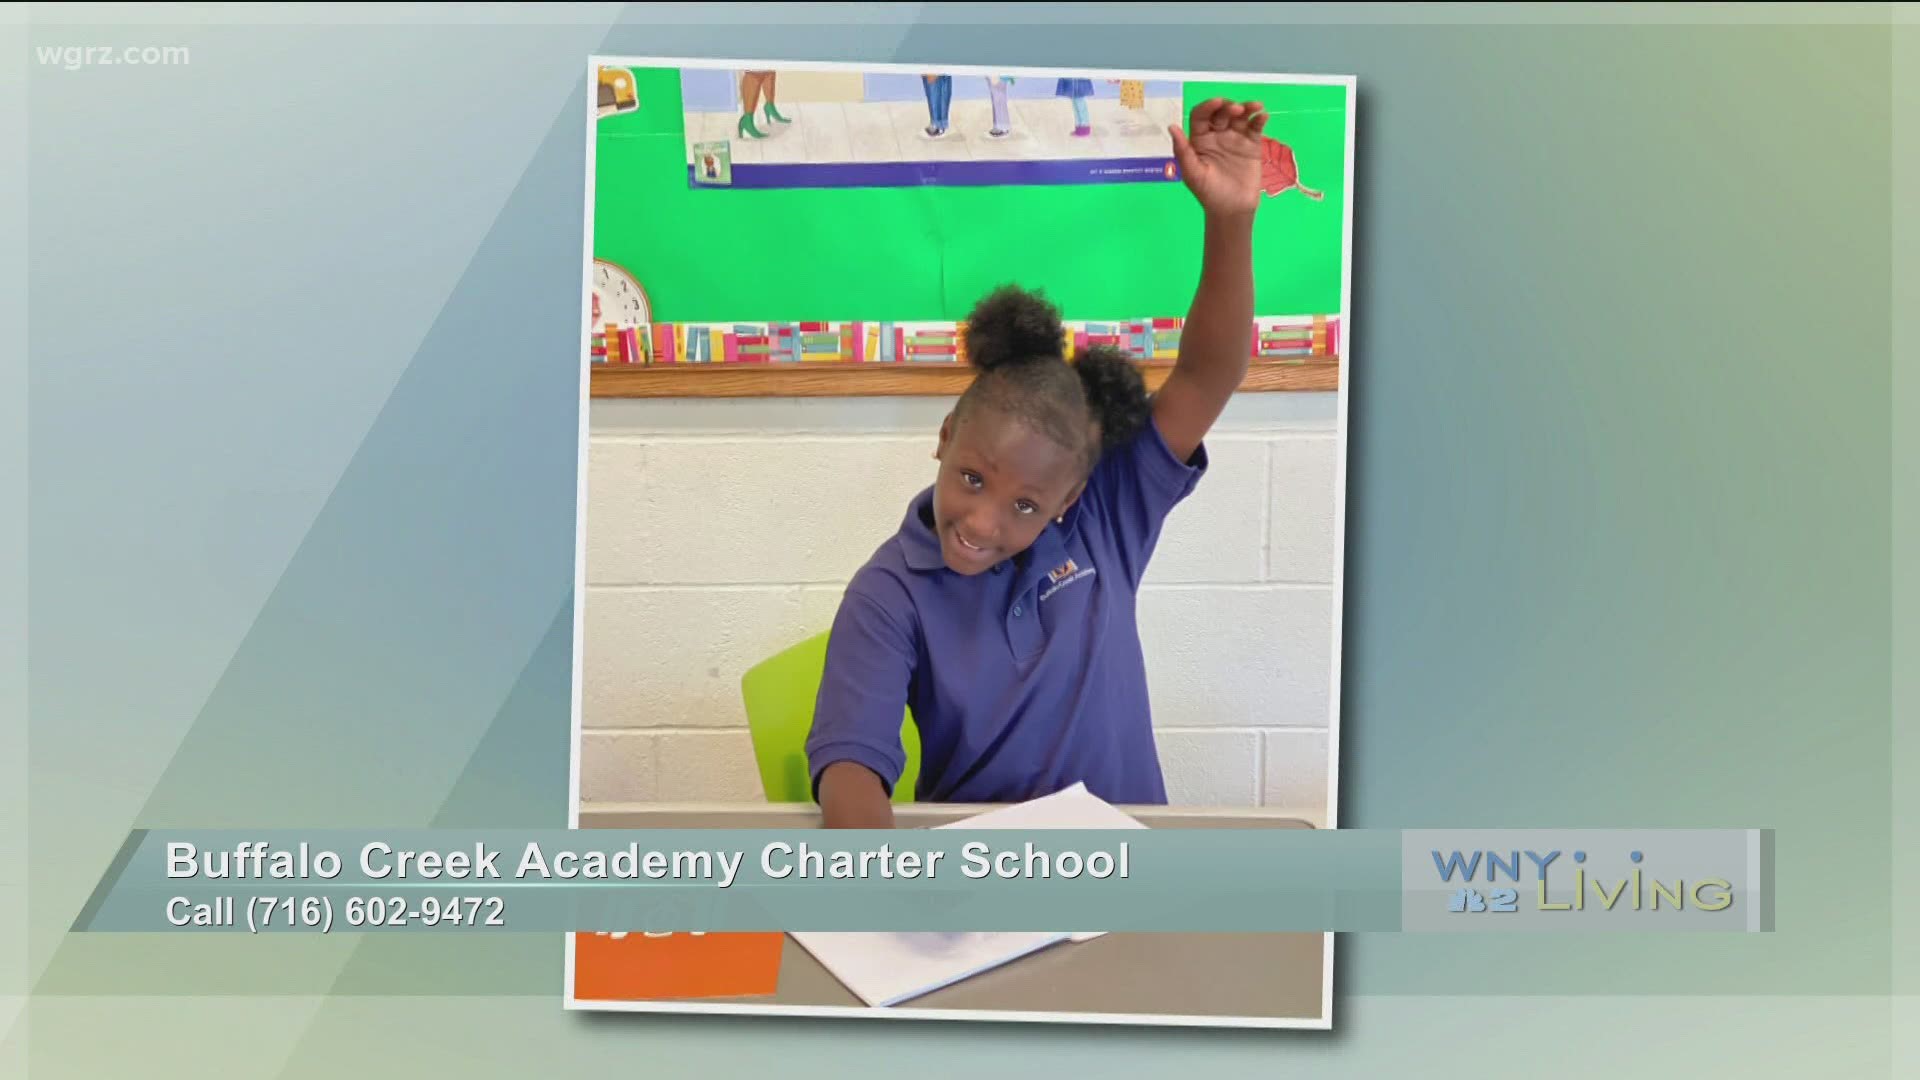 WNY Living - August 1 - Buffalo Creek Academy Charter School (THIS VIDEO IS SPONSORED BY BUFFALO CREEK ACADEMY CHARTER SCHOOL)